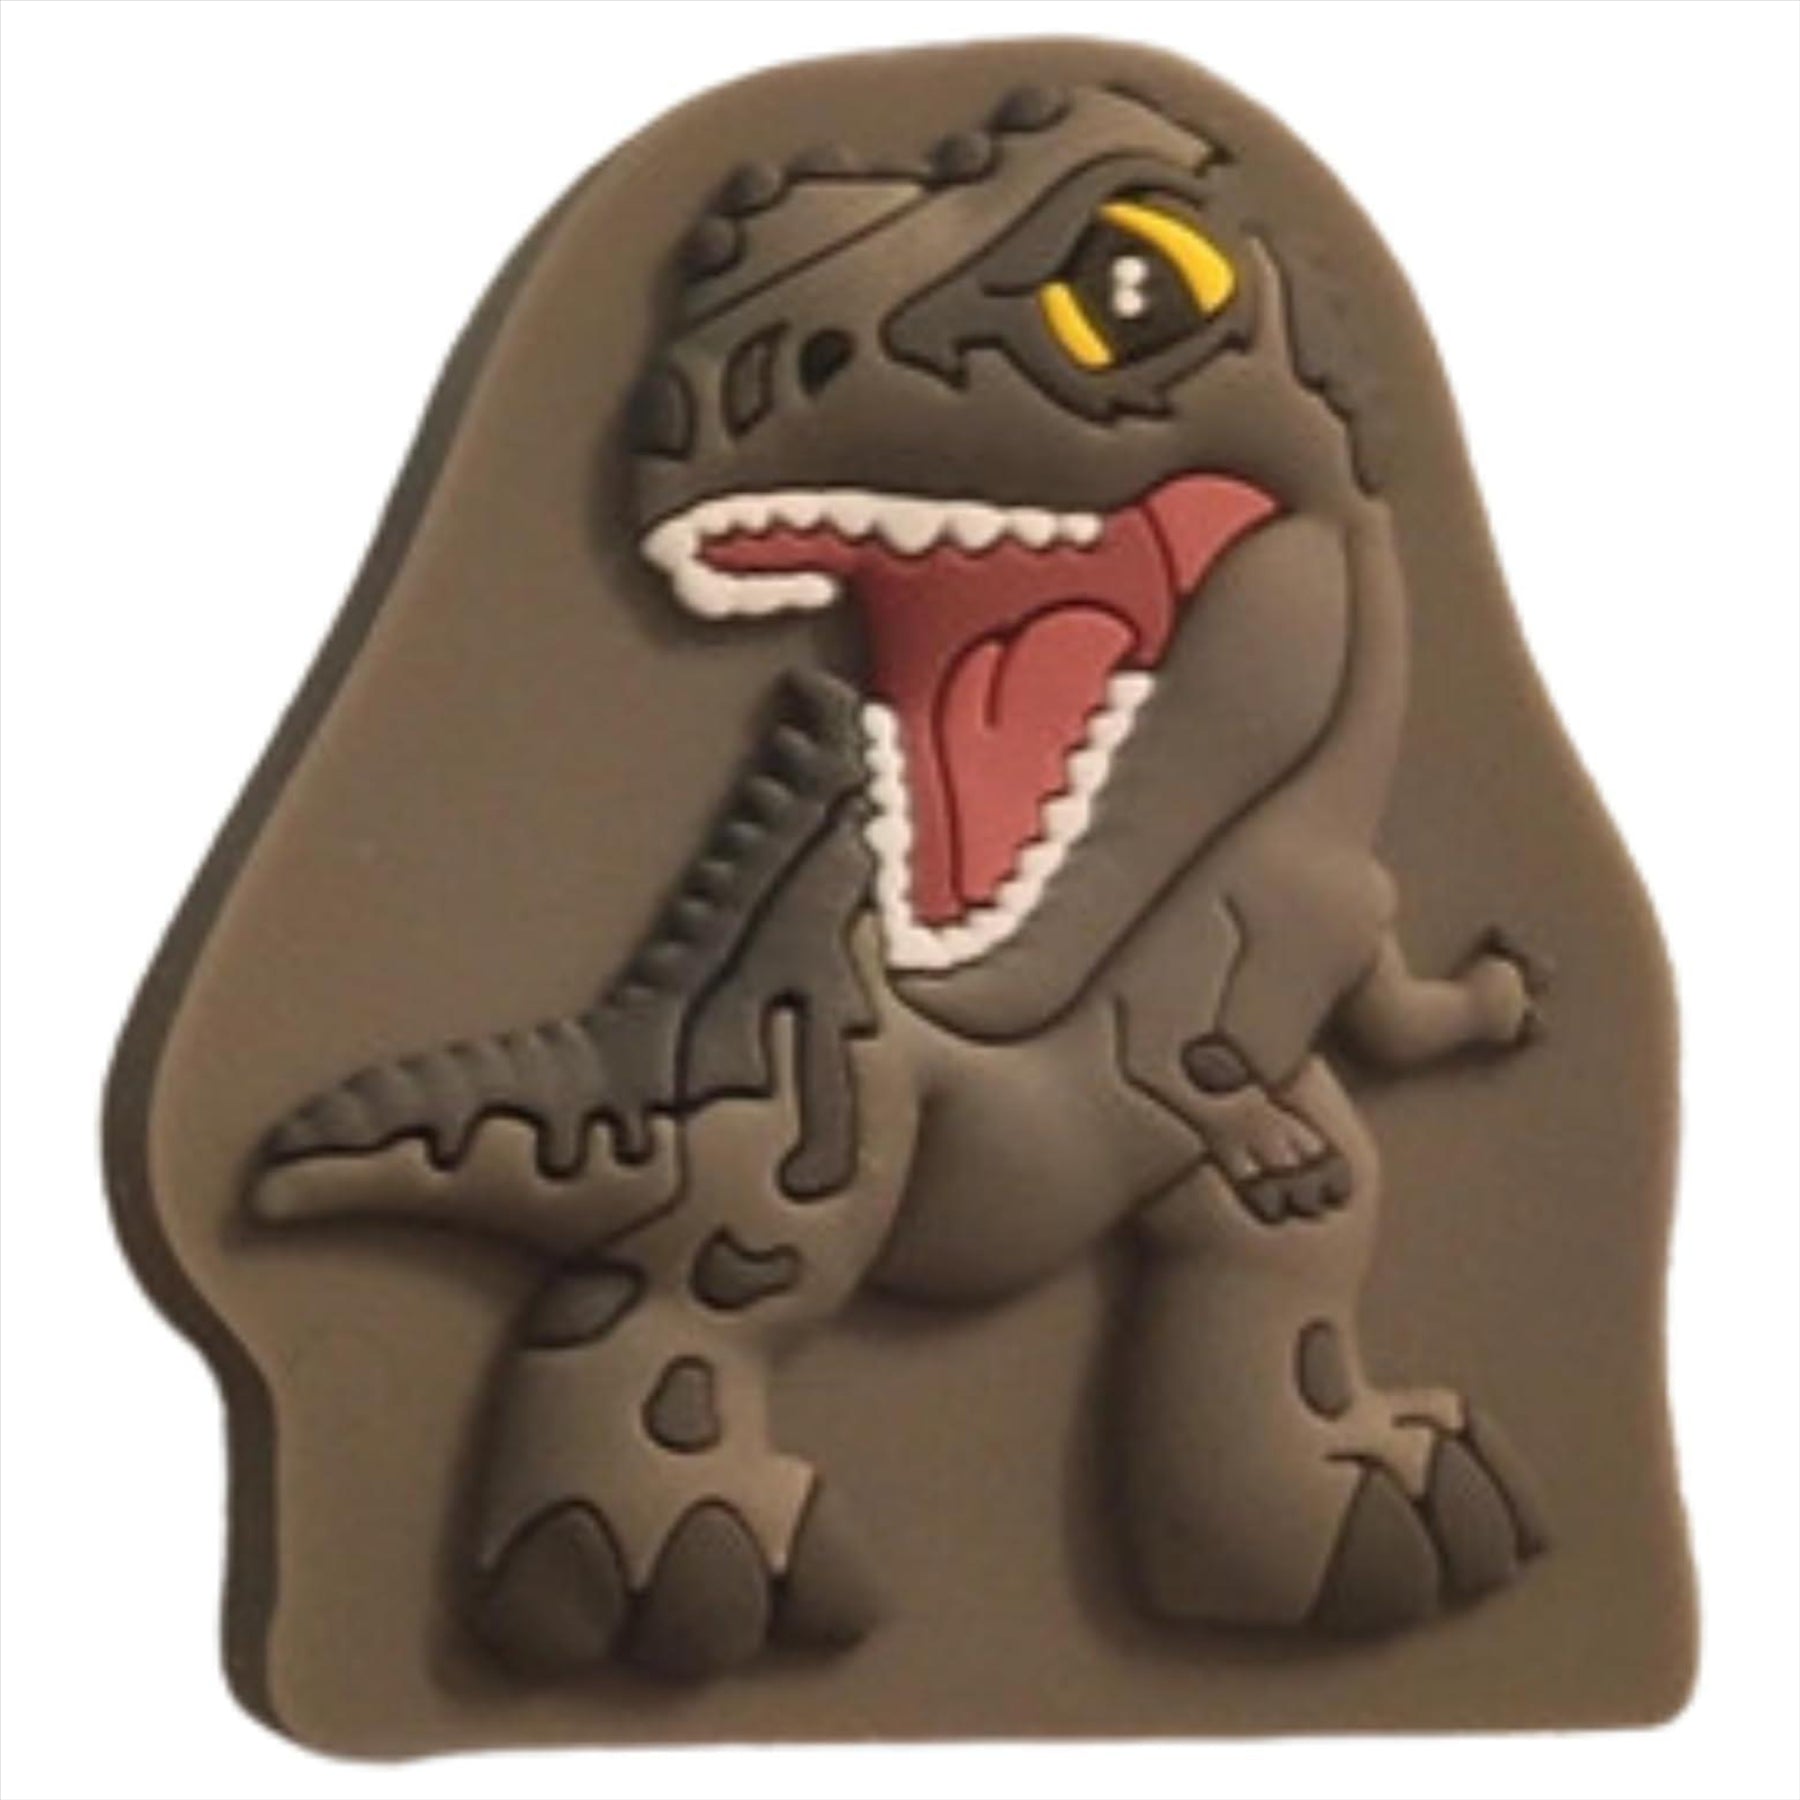 Jurassic World - Burger King Kids Meal Collectable 2D Soft PVC Toy - Dinosaur Collection Pack of 10 Blind Bags - Toptoys2u